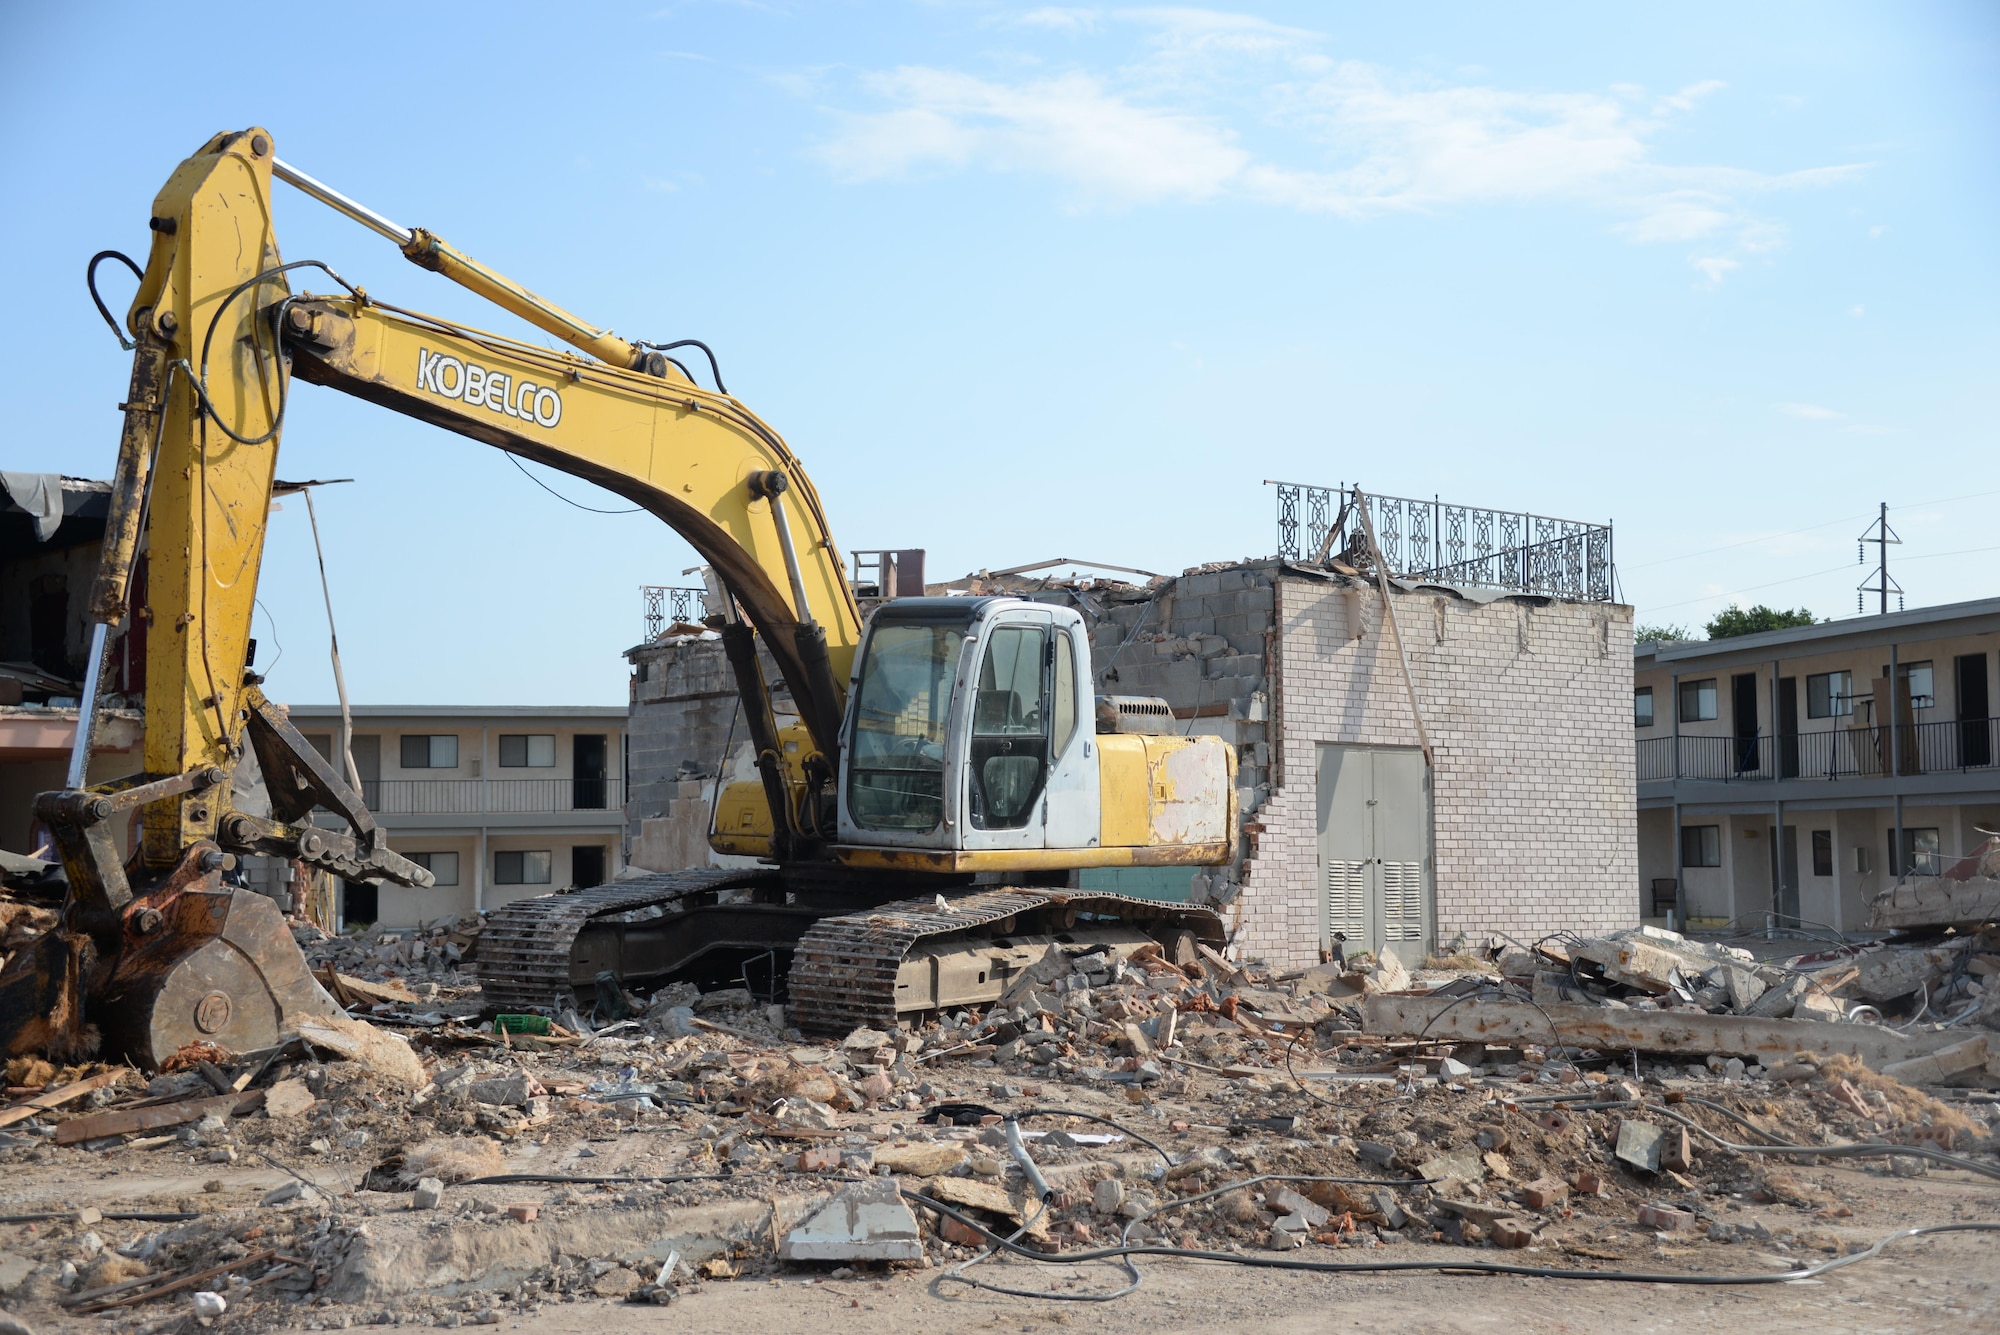 Demolition continues outside Sheppard's Main Gate as part of a $3.5 million project by the city of Wichita Falls to improve the area.